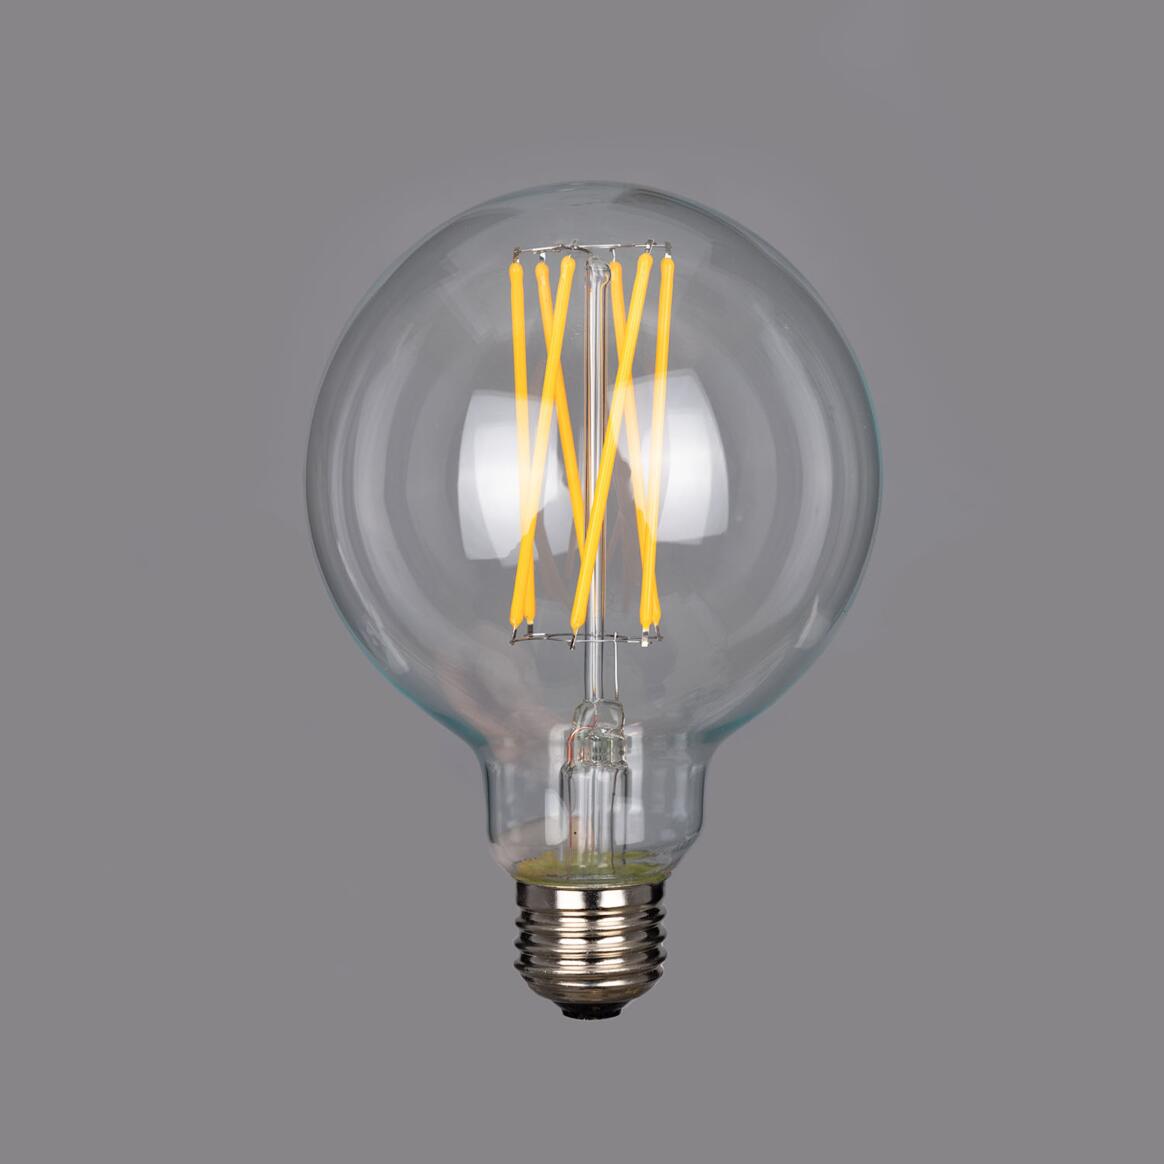 LED XL Round Filament Bulb Dimmable E26 4W 2300k 350lm 3.7" main product image